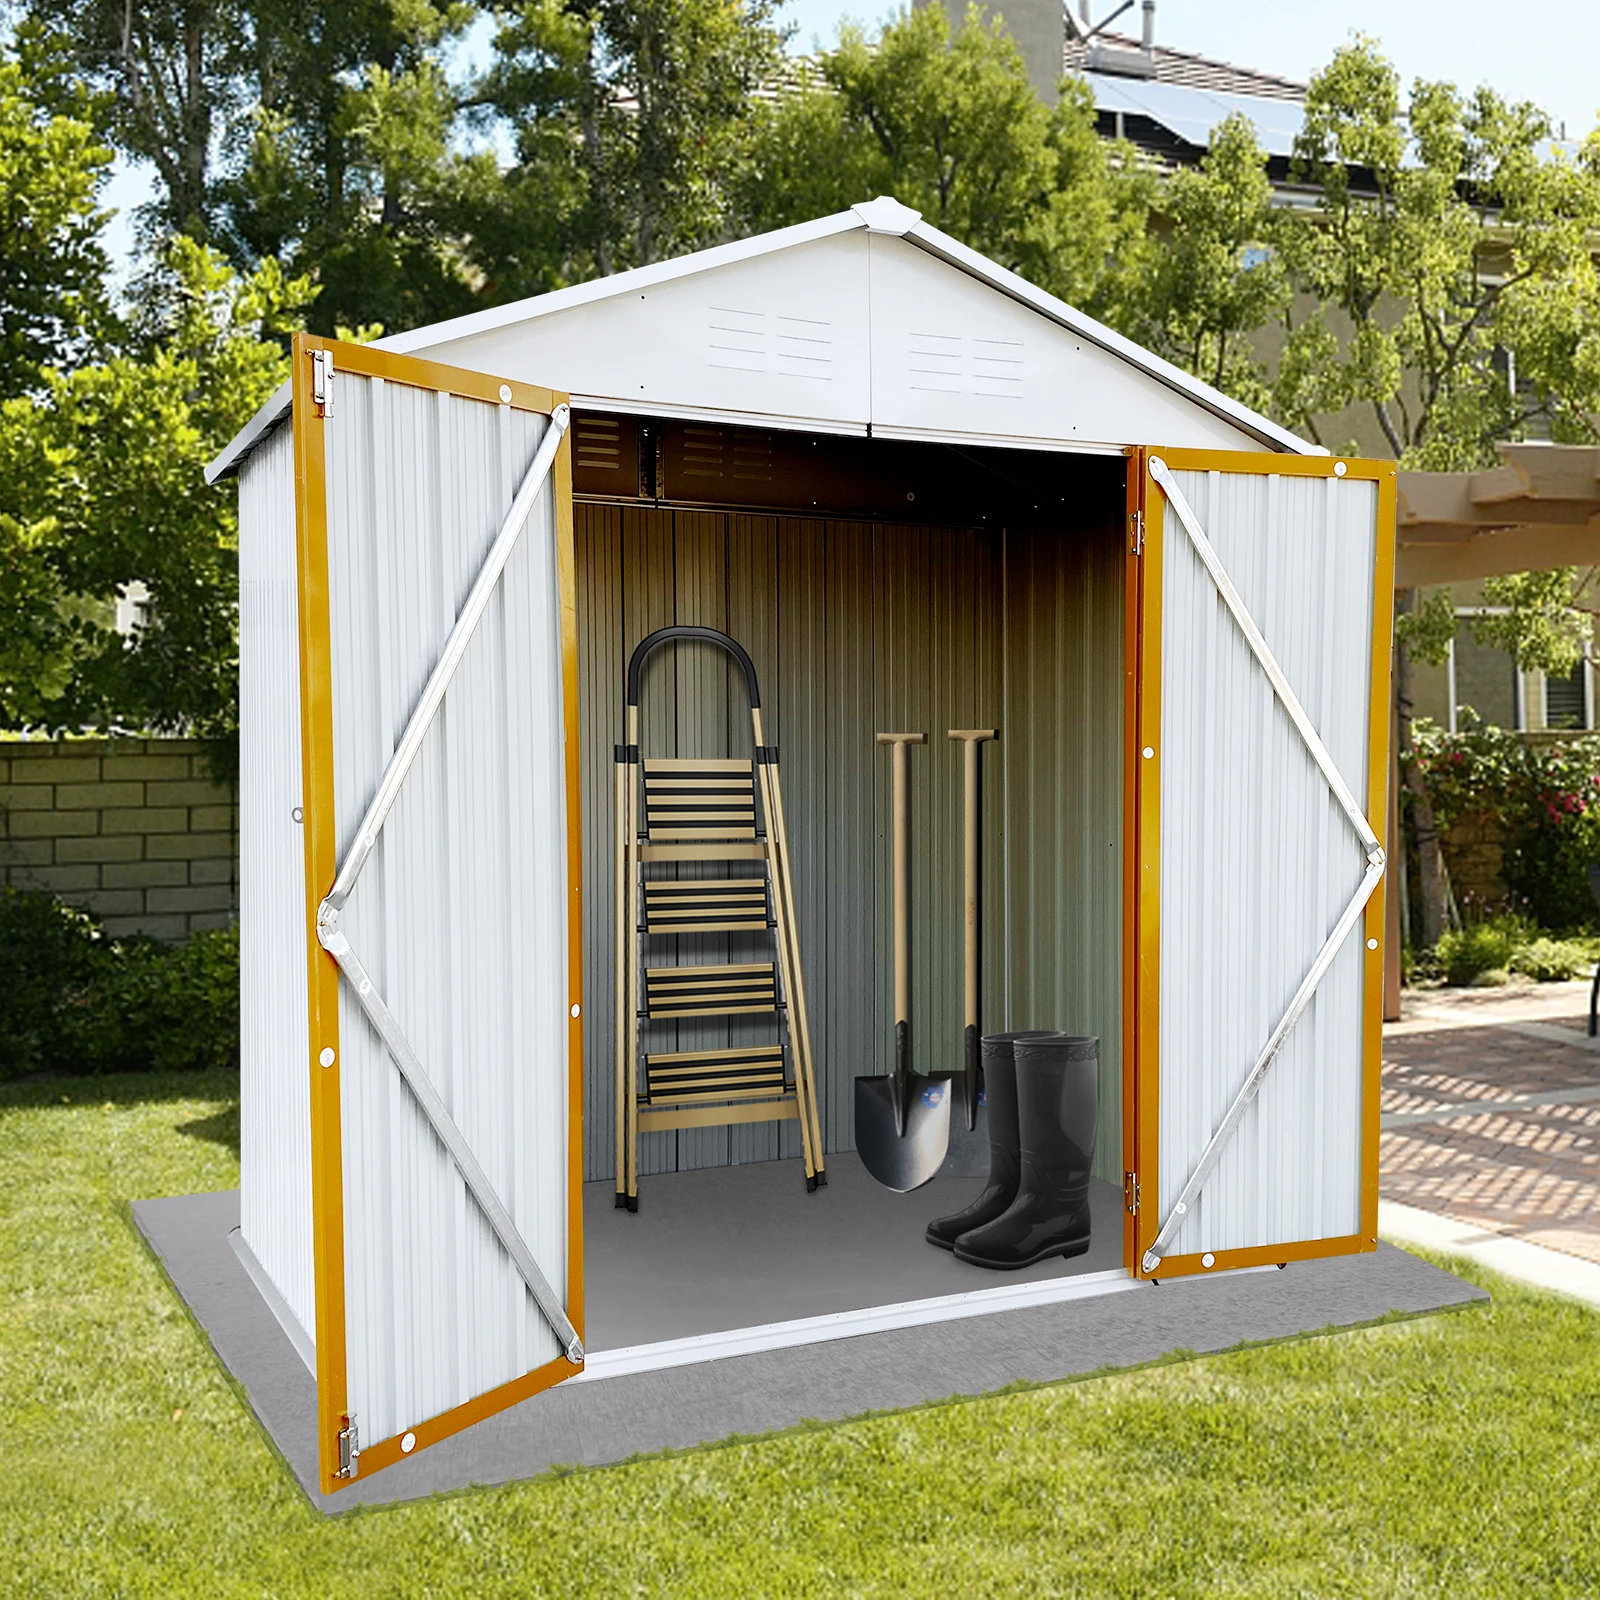 

Outdoor Storage Sheds 4FTx6FT Apex Roof White+Yellow for Garden Backyard Lawn, Large Patio House Building with Lockable Door